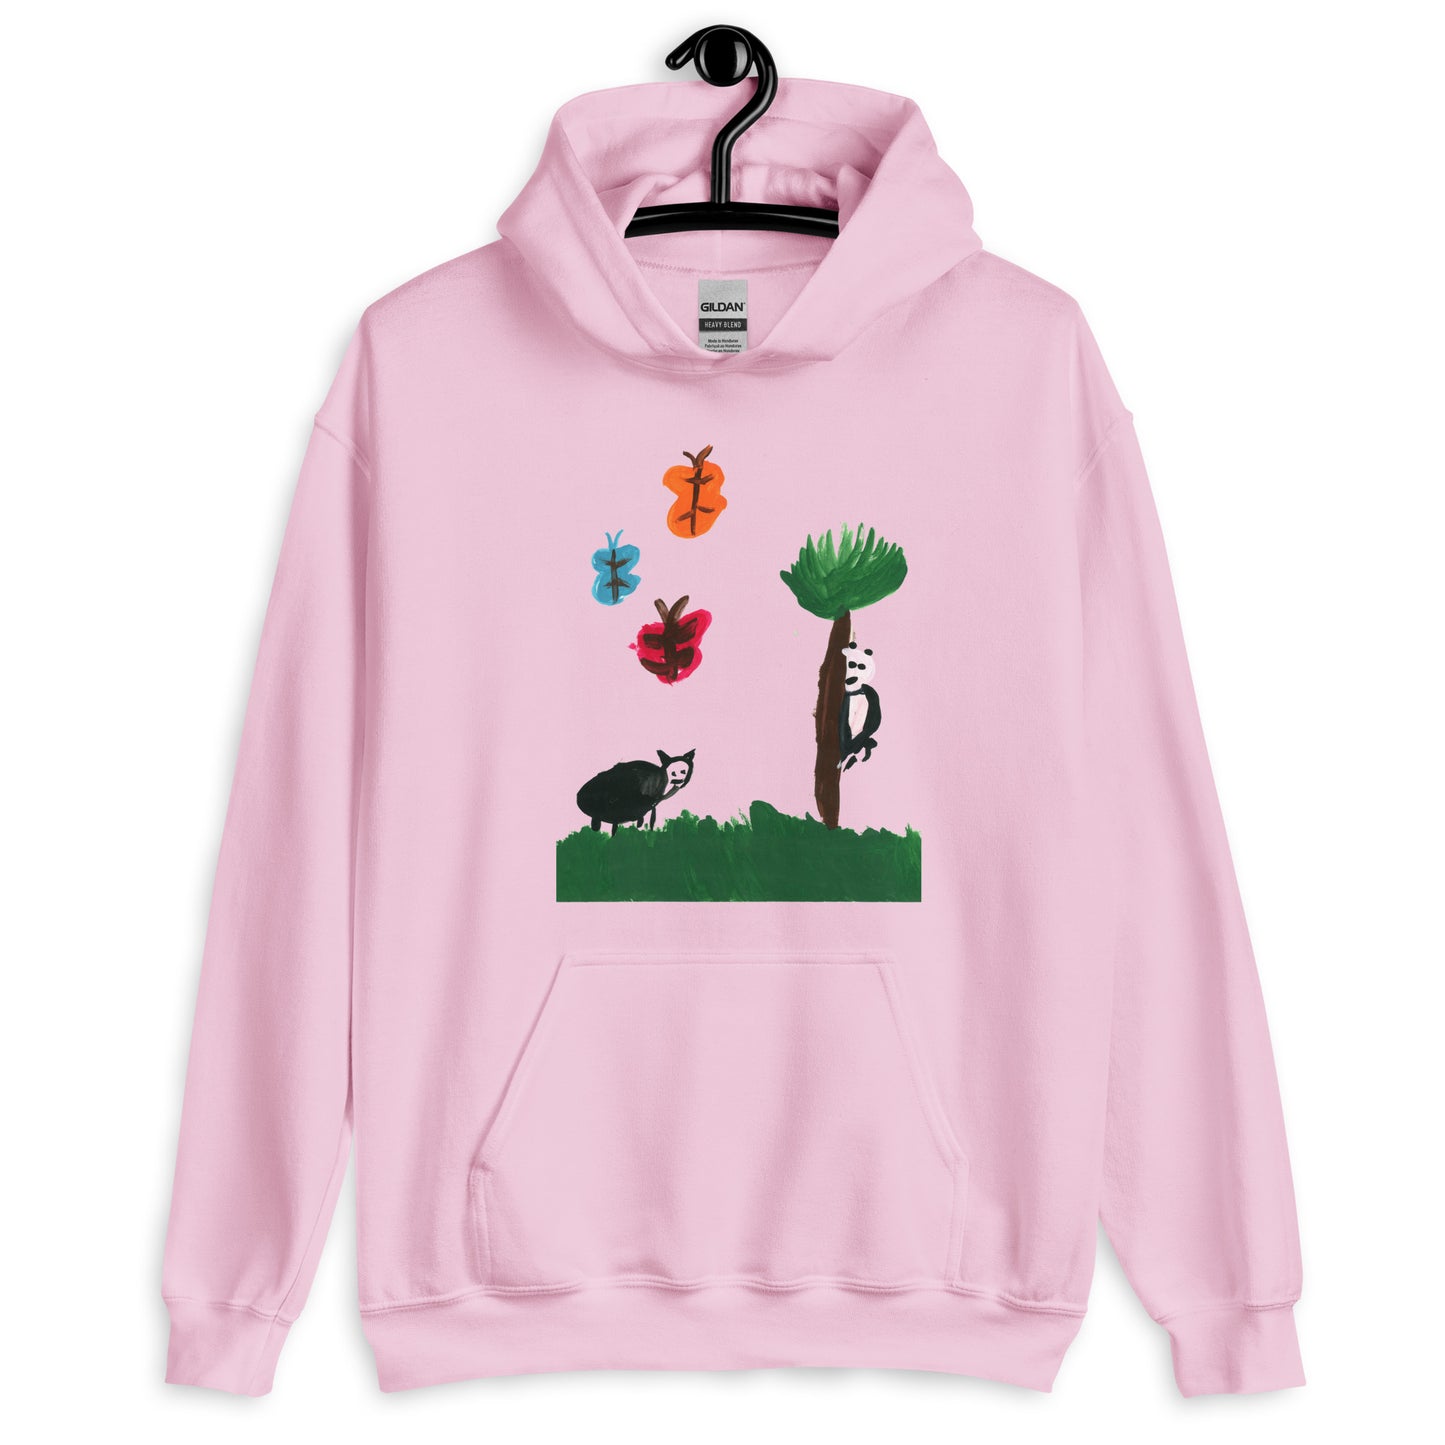 Hoodie - Design Created By Alizea